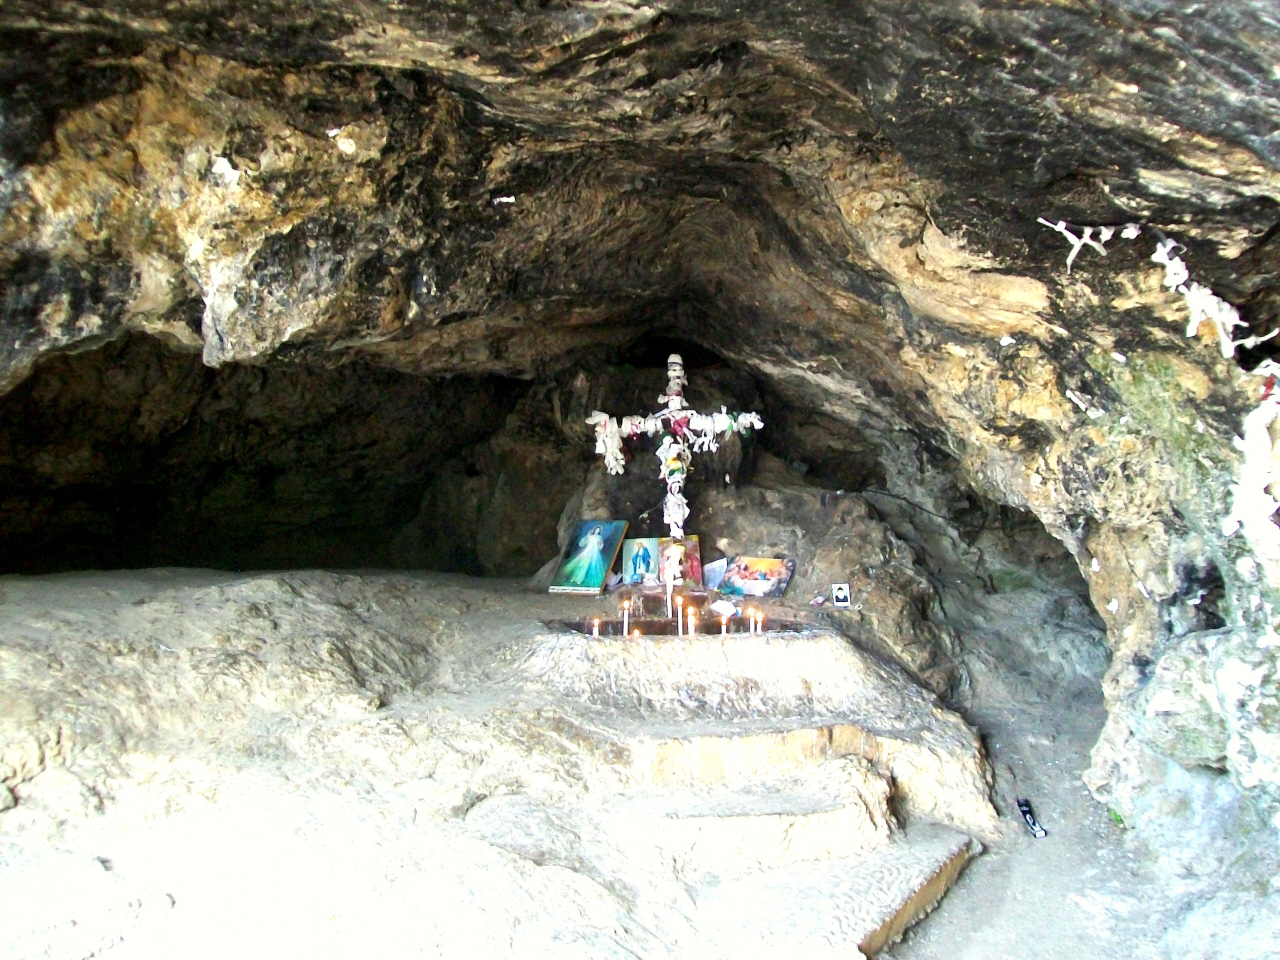 Cave Where the Miracle of the Wedding Took Place (Christian-New Testament) - Cana - Lebanon